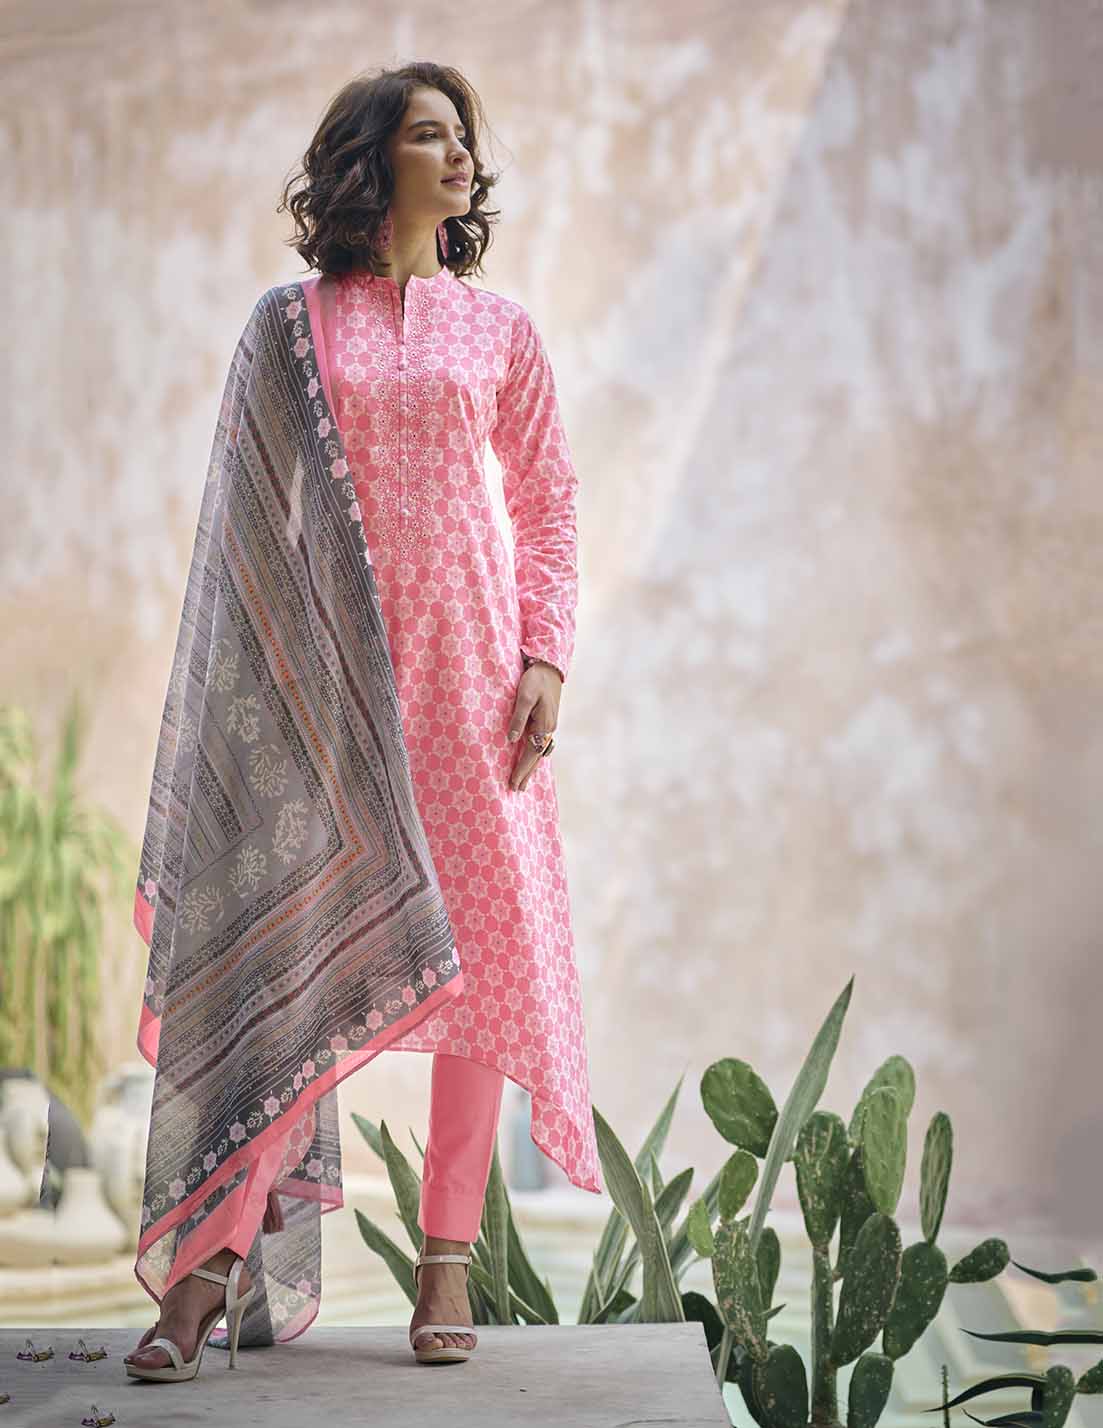 Unstitched Pure Lawn Cotton Pink Suit Material with Embroidery